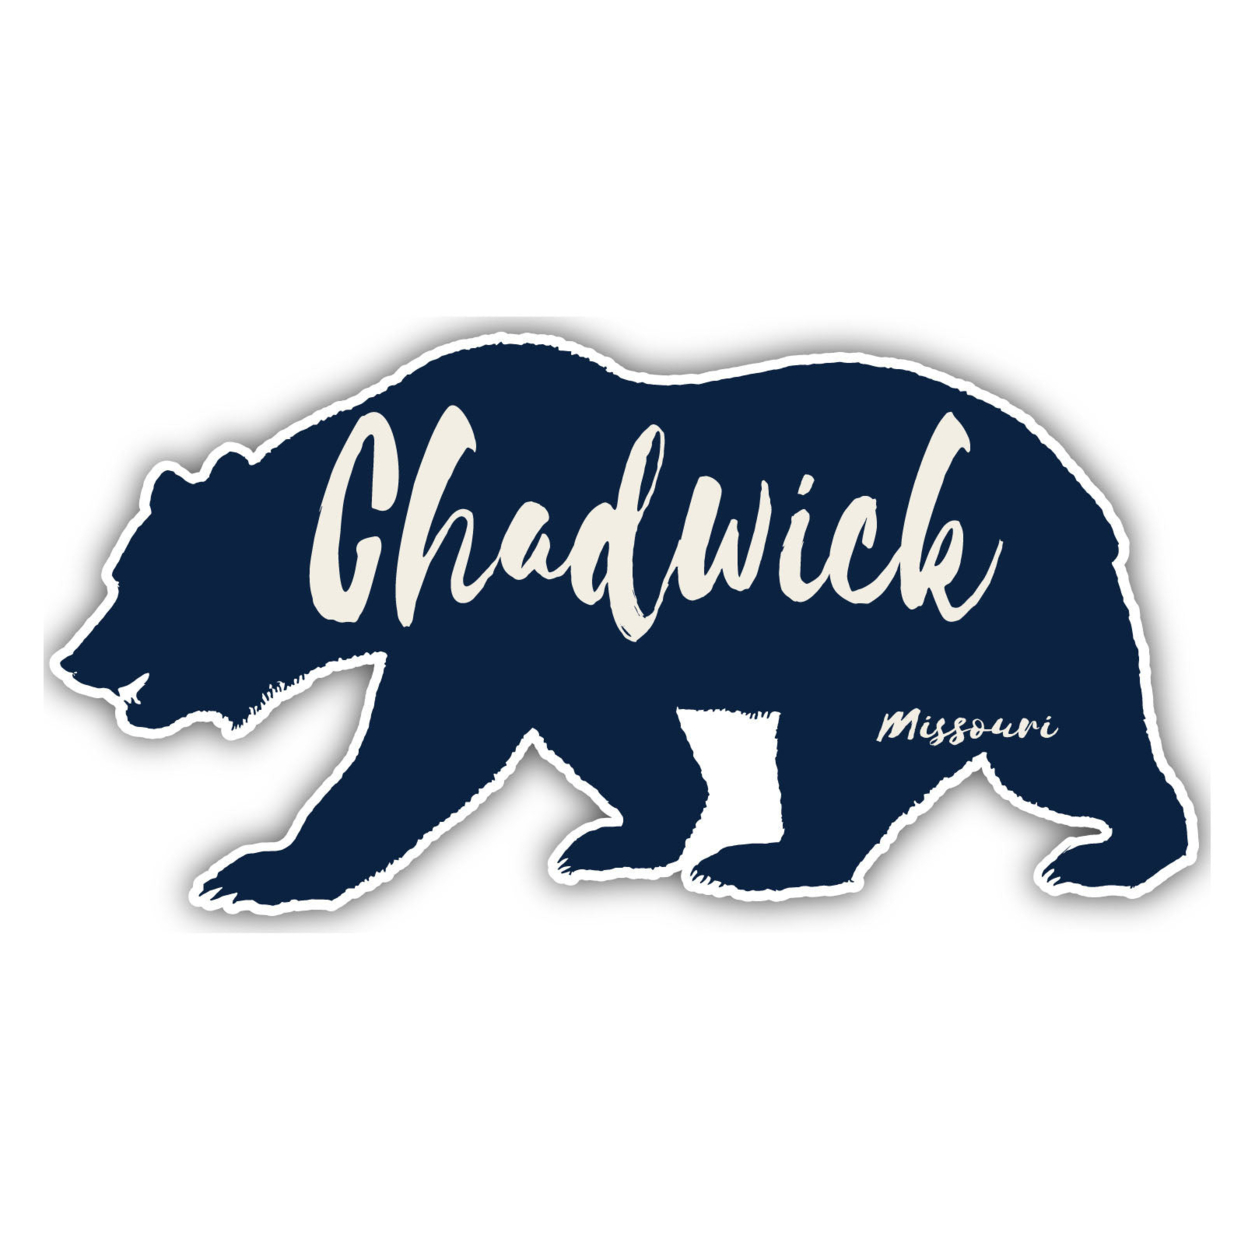 Chadwick Missouri Souvenir Decorative Stickers (Choose Theme And Size) - 4-Pack, 2-Inch, Adventures Awaits